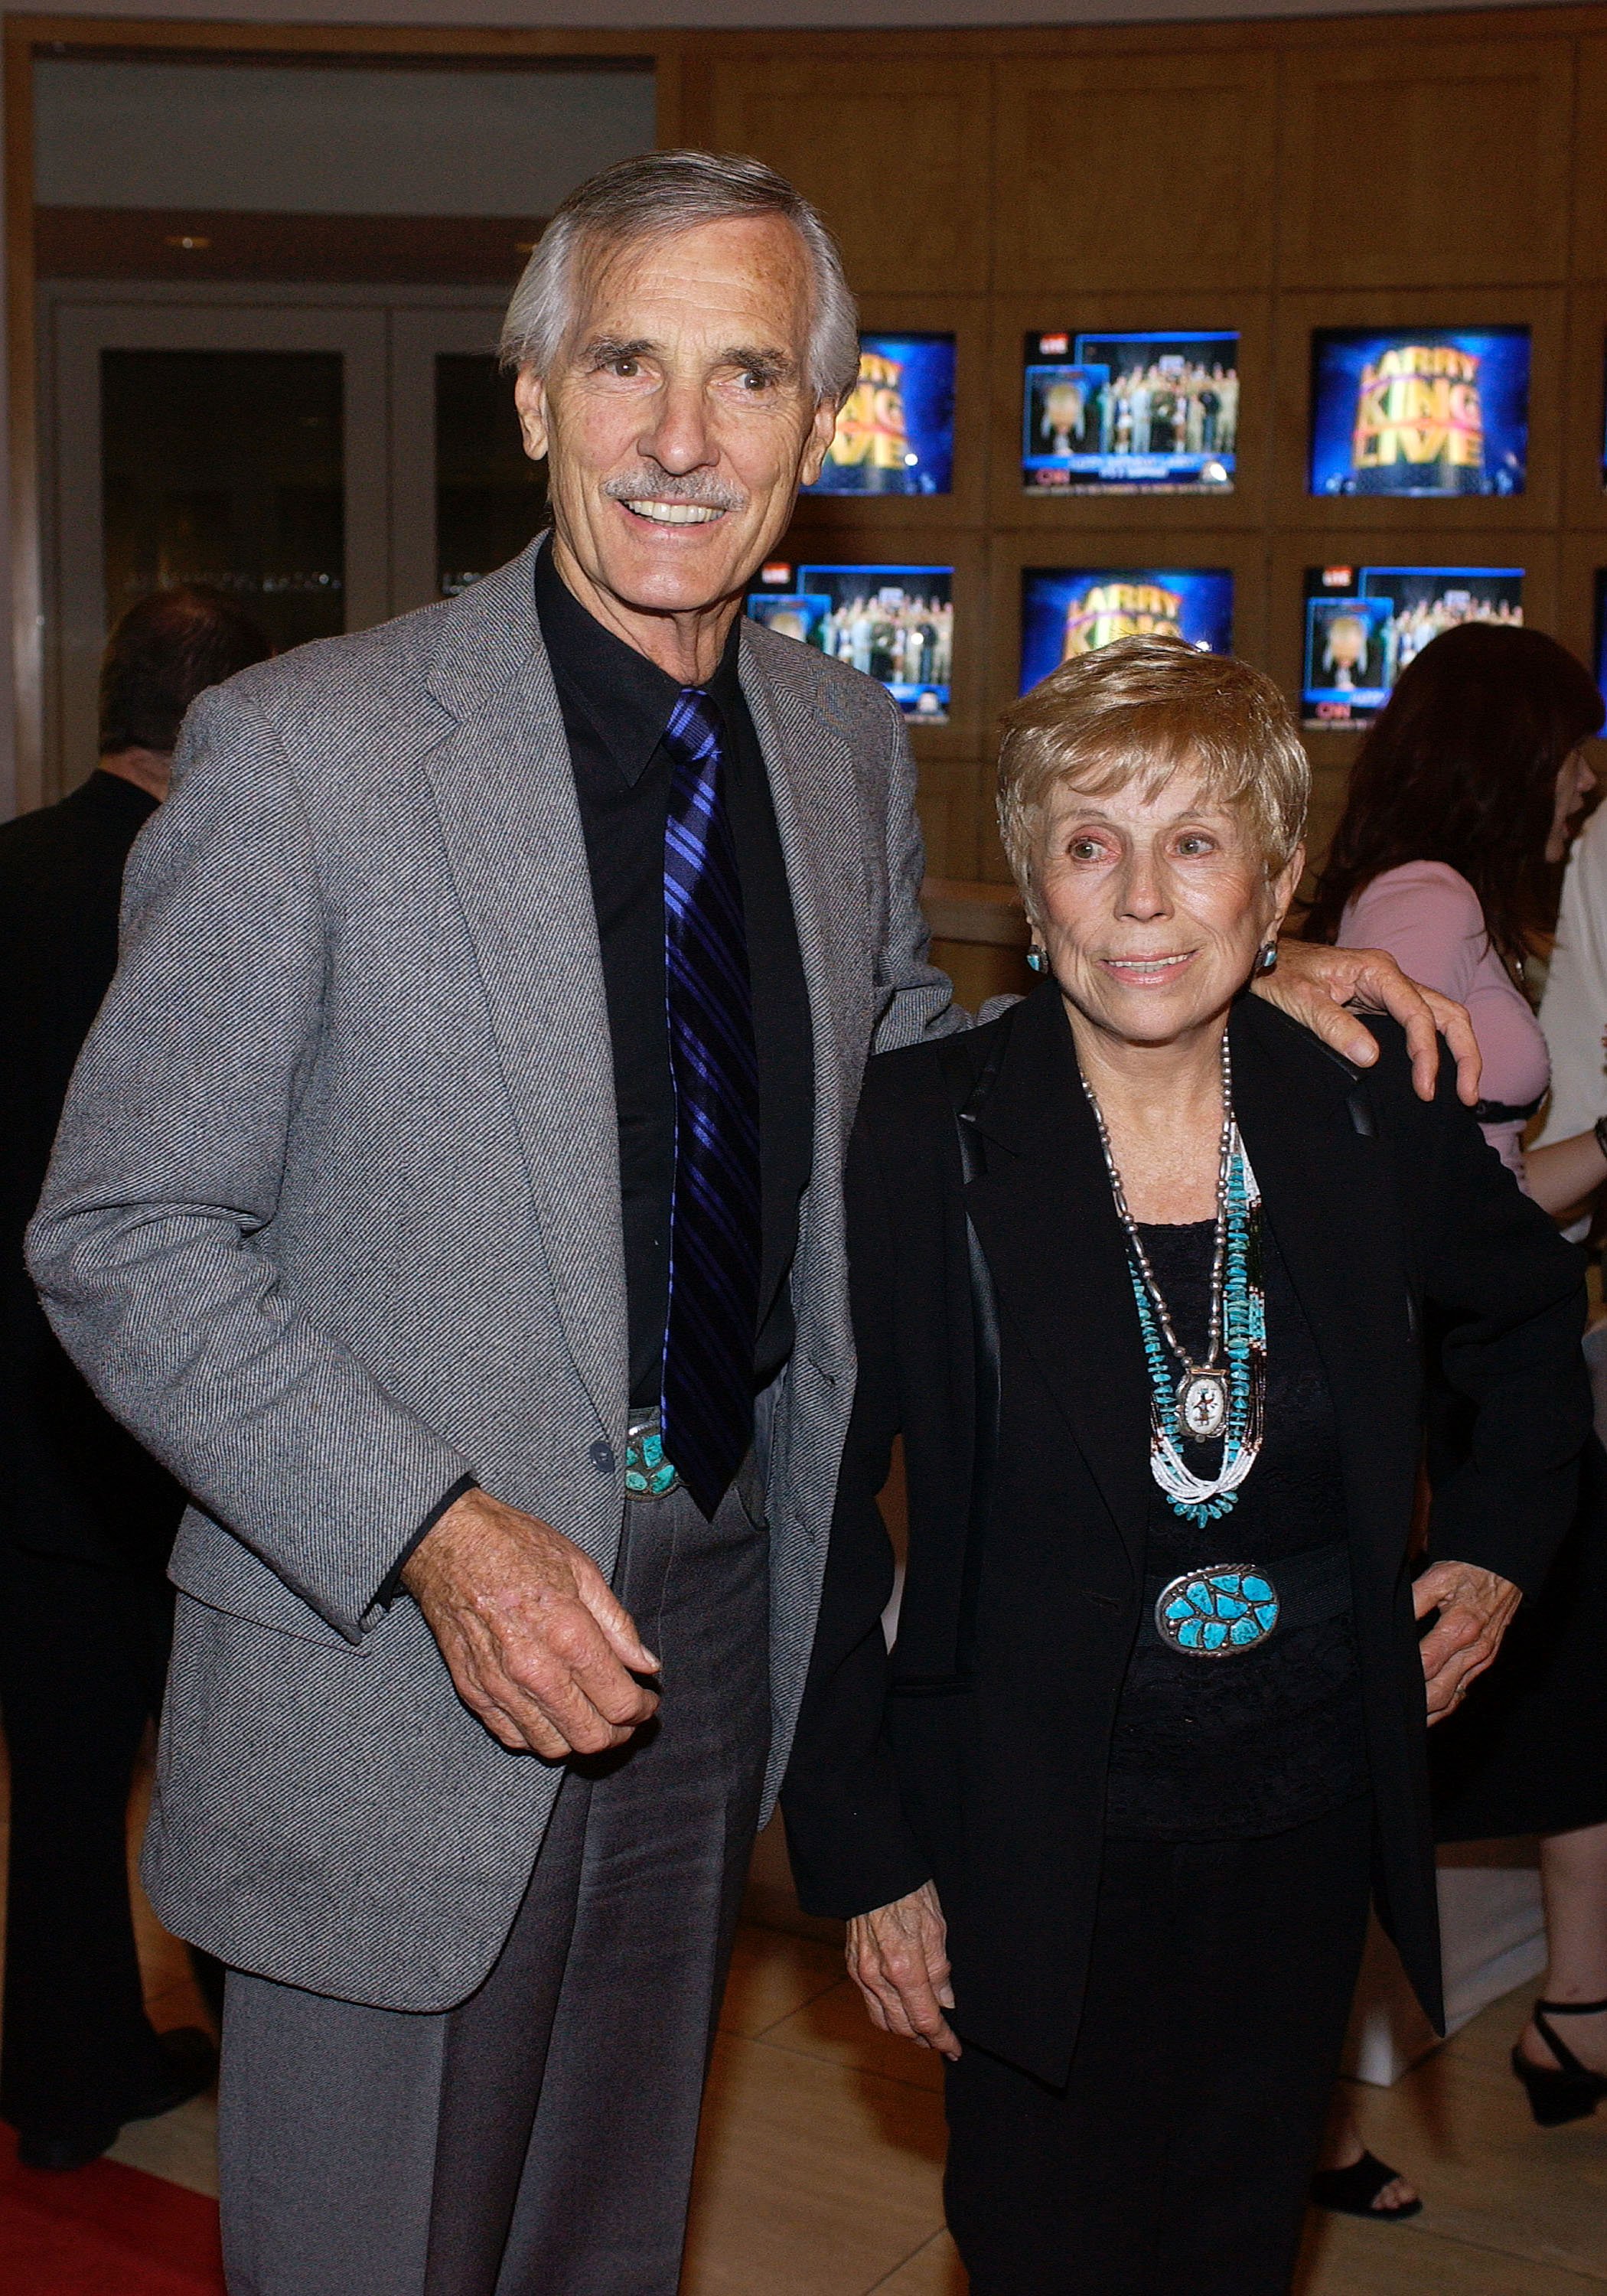 Dennis Weaver and Gerry Stowell attend a surprise 70th birthday party for TV show host Larry King at the Museum of Television and Radio on November 19, 2003, in Beverly Hills, California. / Source: Getty Images